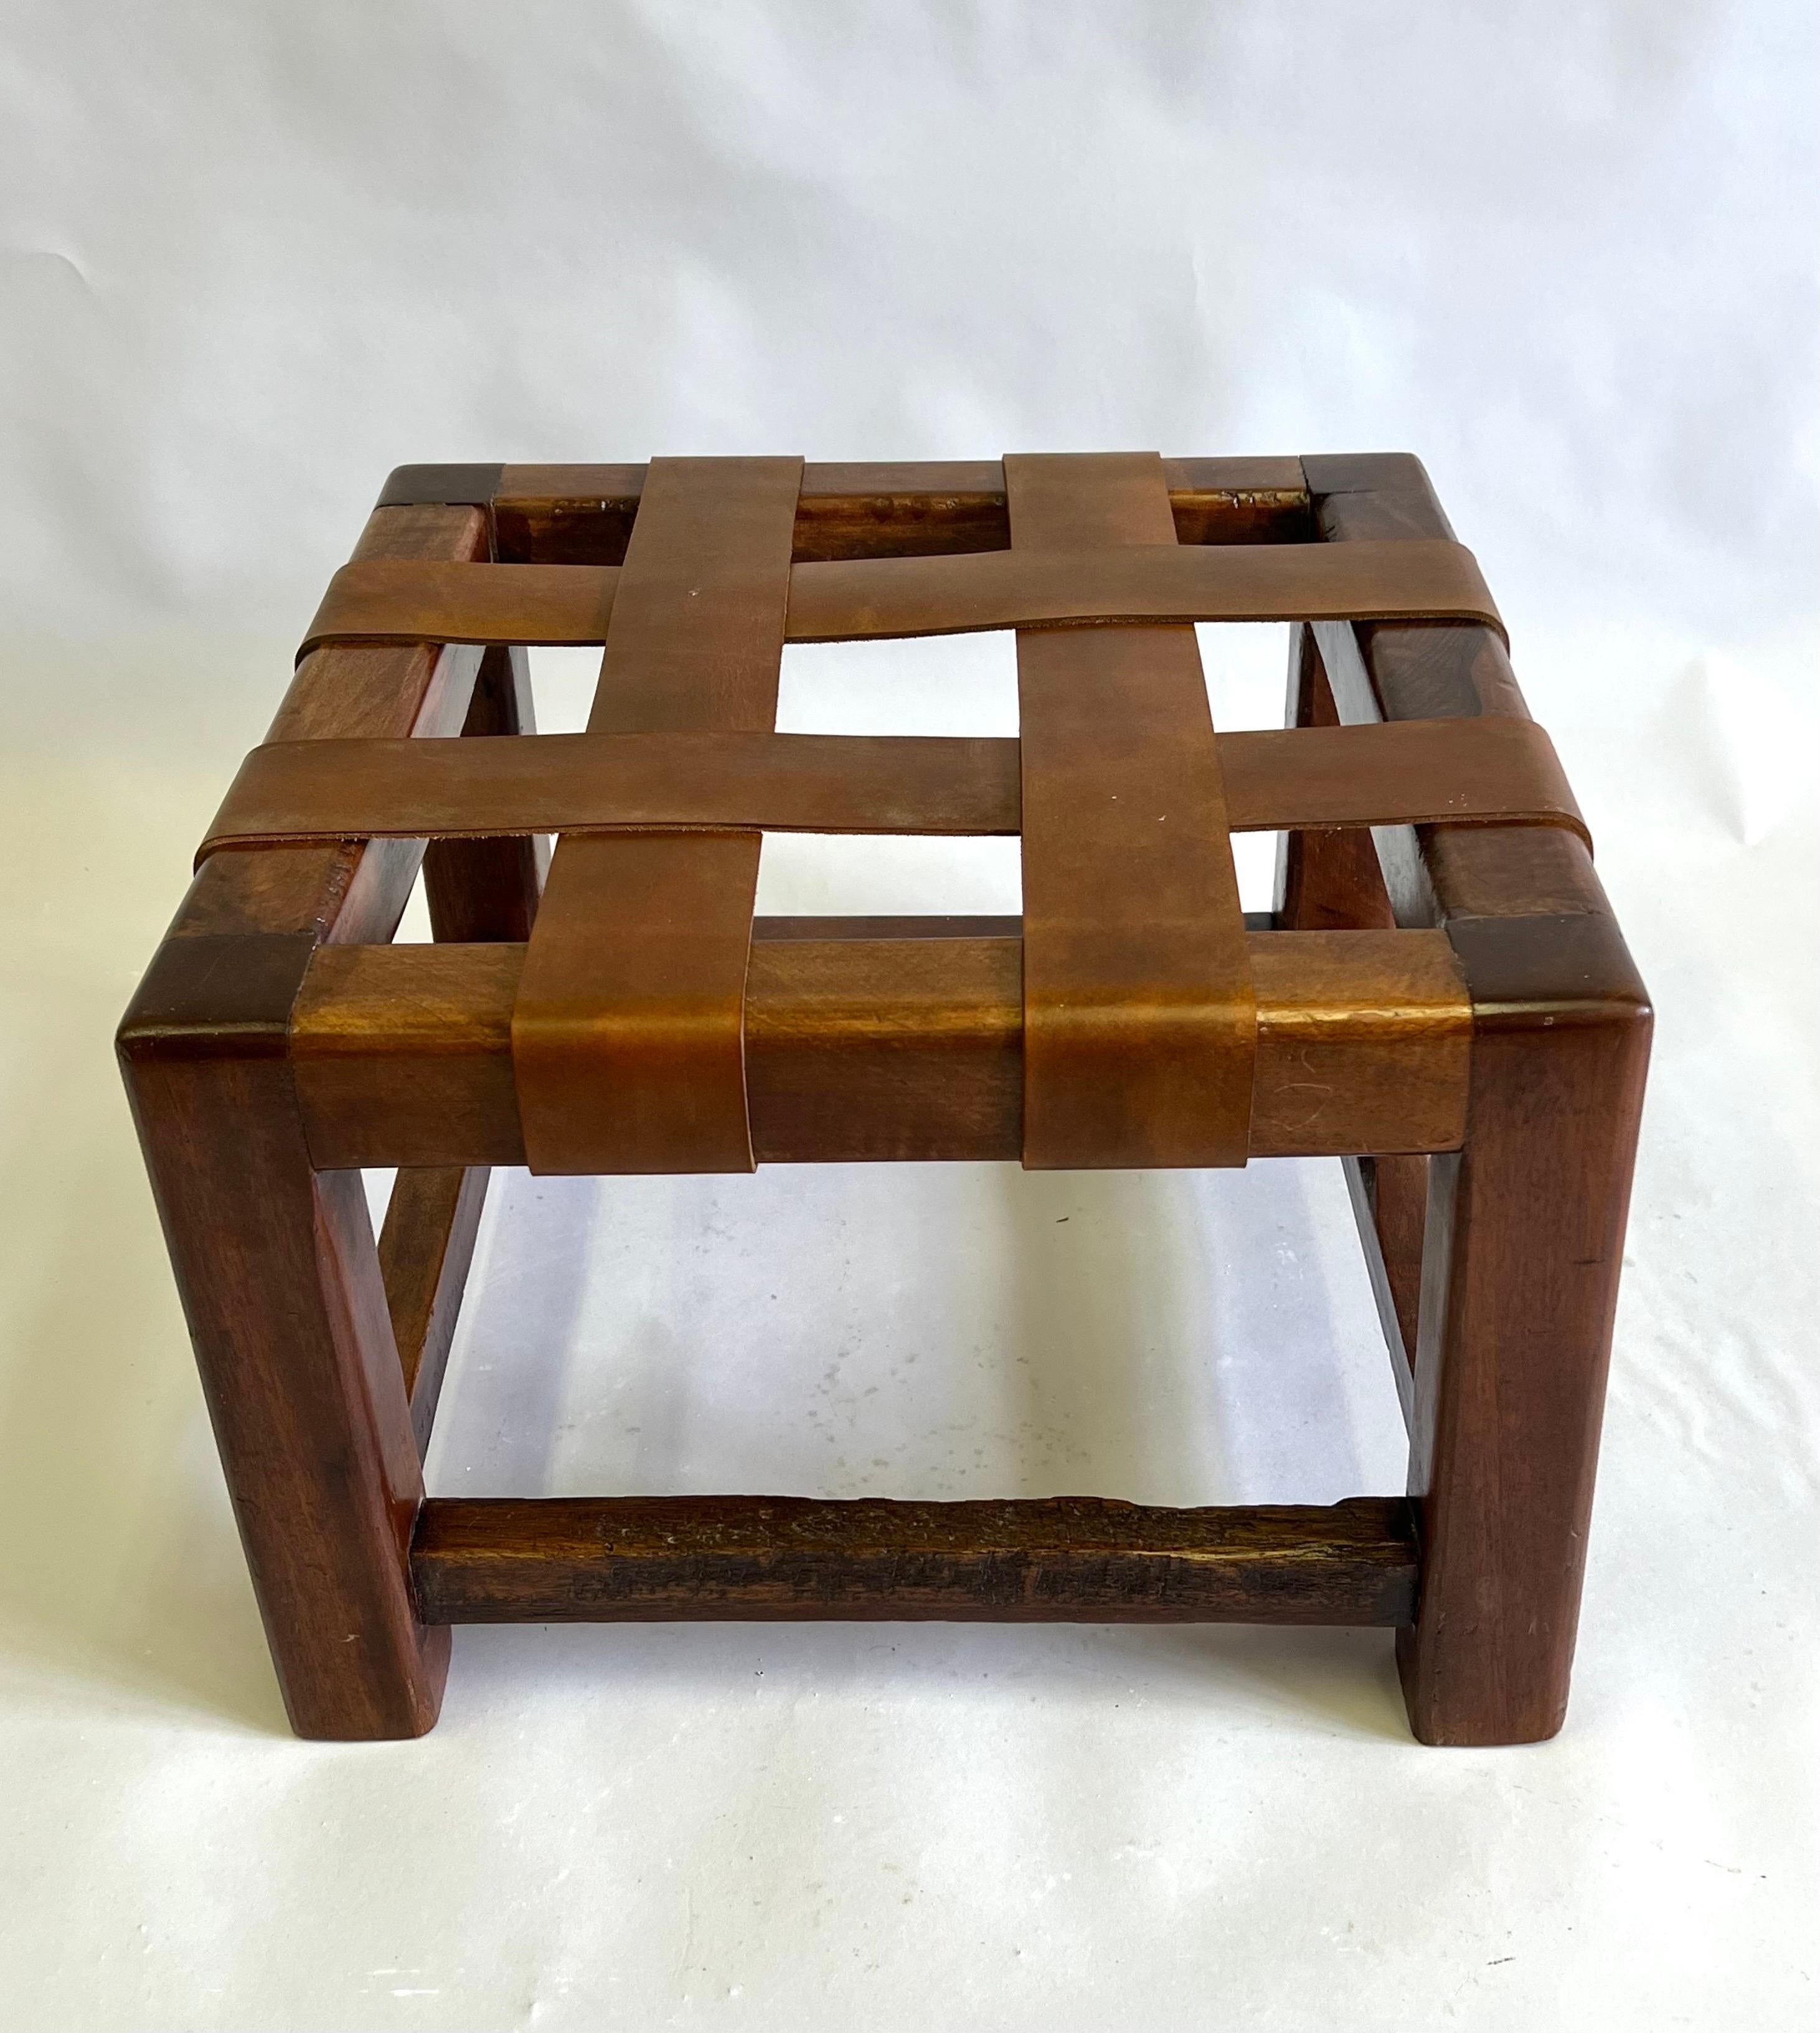 Rare French Midcentury / Late Art Deco, Hand Made Stool or Bench in the style of Jean Michel Frank. The piece is composed of hand hewn hardwood and wide hand crafted leather straps arranged in a rhythmic geometric pattern. This exquisite and